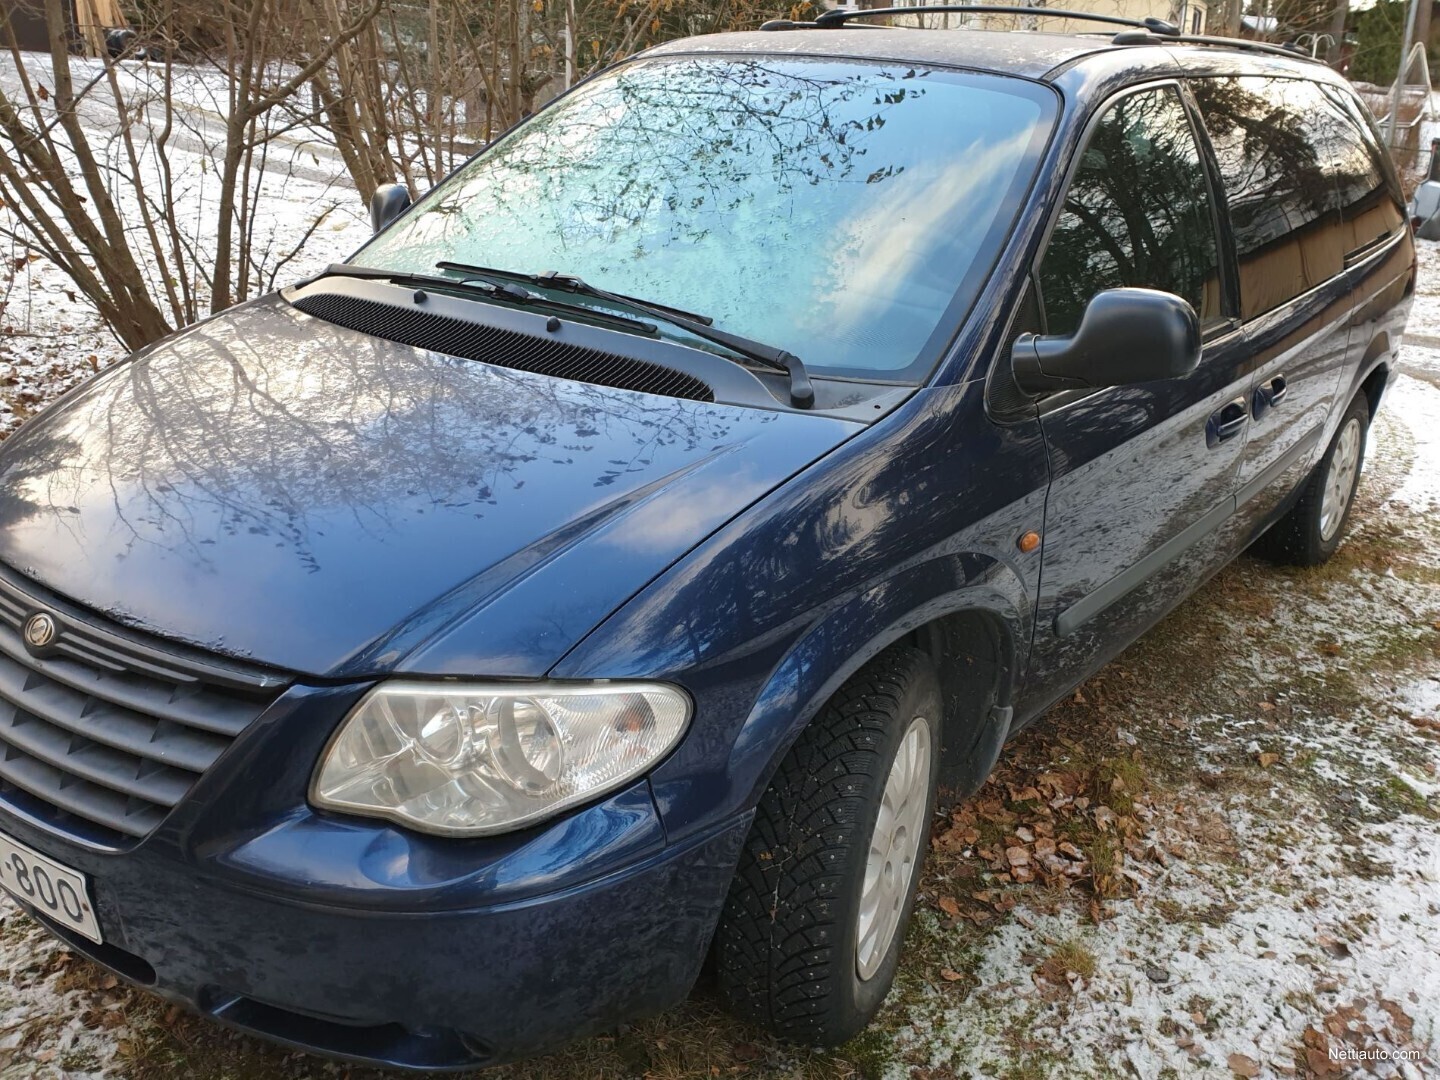 Chrysler Grand Voyager 2.8 CRD autom. 7h Stow'n'Go MPV 2005 - Used vehicle  - Nettiauto